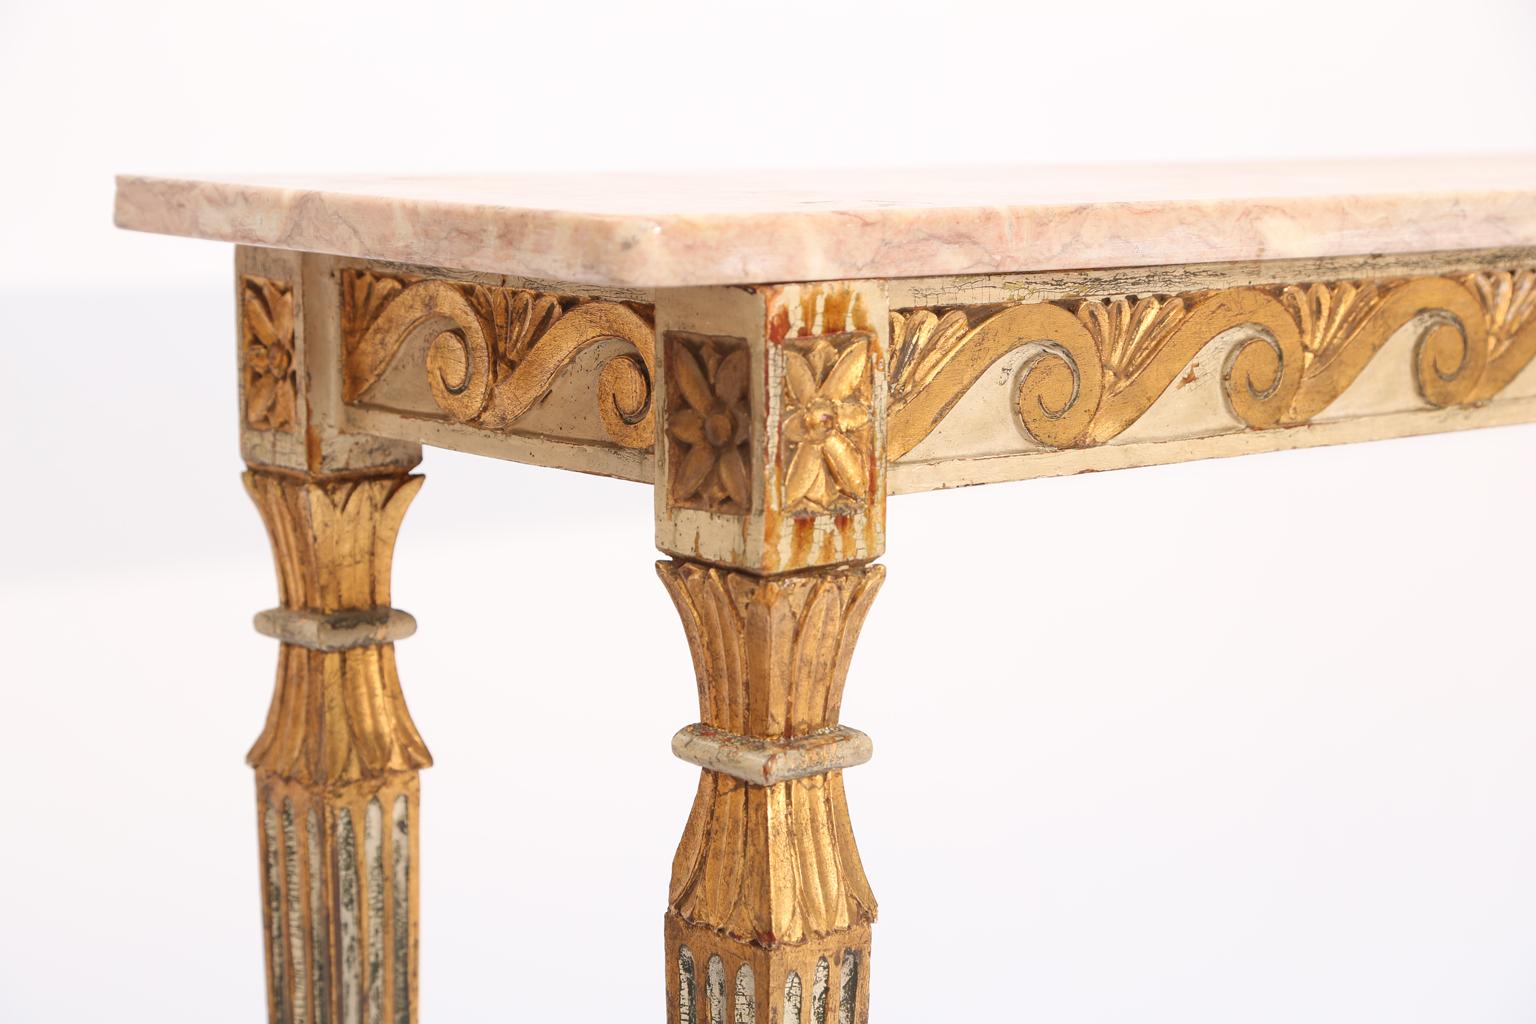 Carved Long and Narrow Italian Parcel-Gilt Marble-Top Console with Scrolling Wave Apron